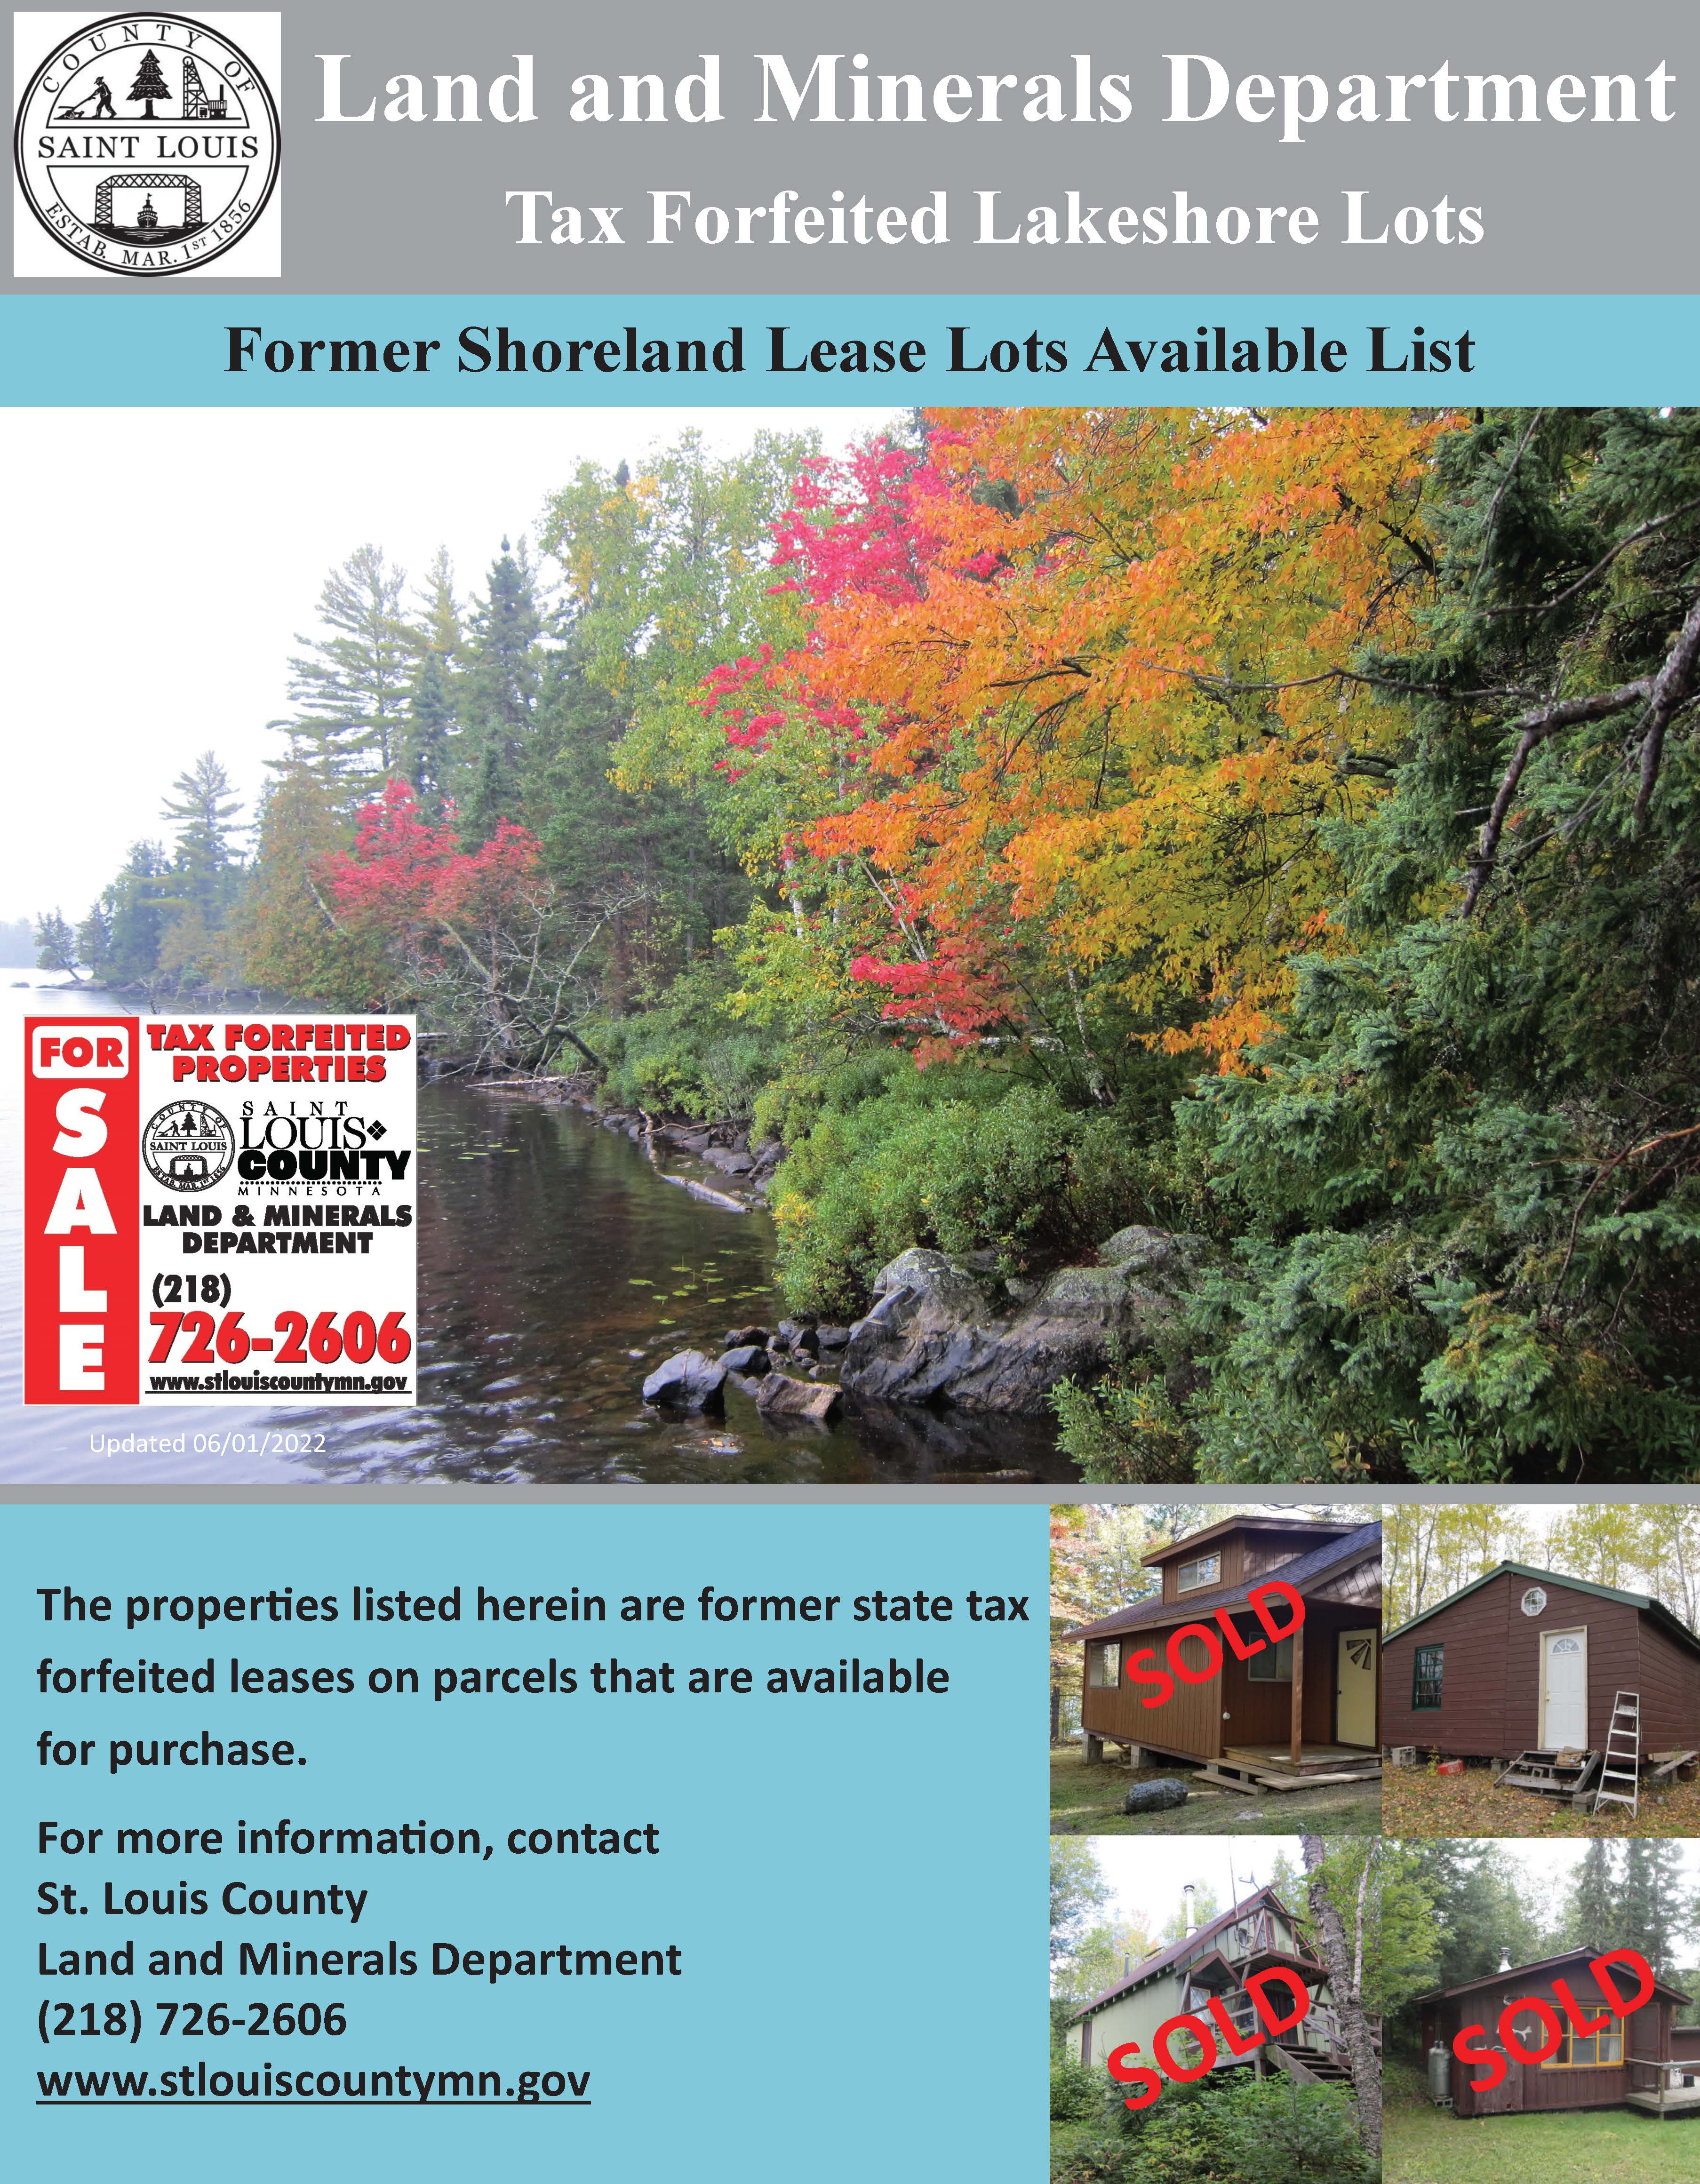 Opens pdf of the Former Shoreland Lease Lot Available Book